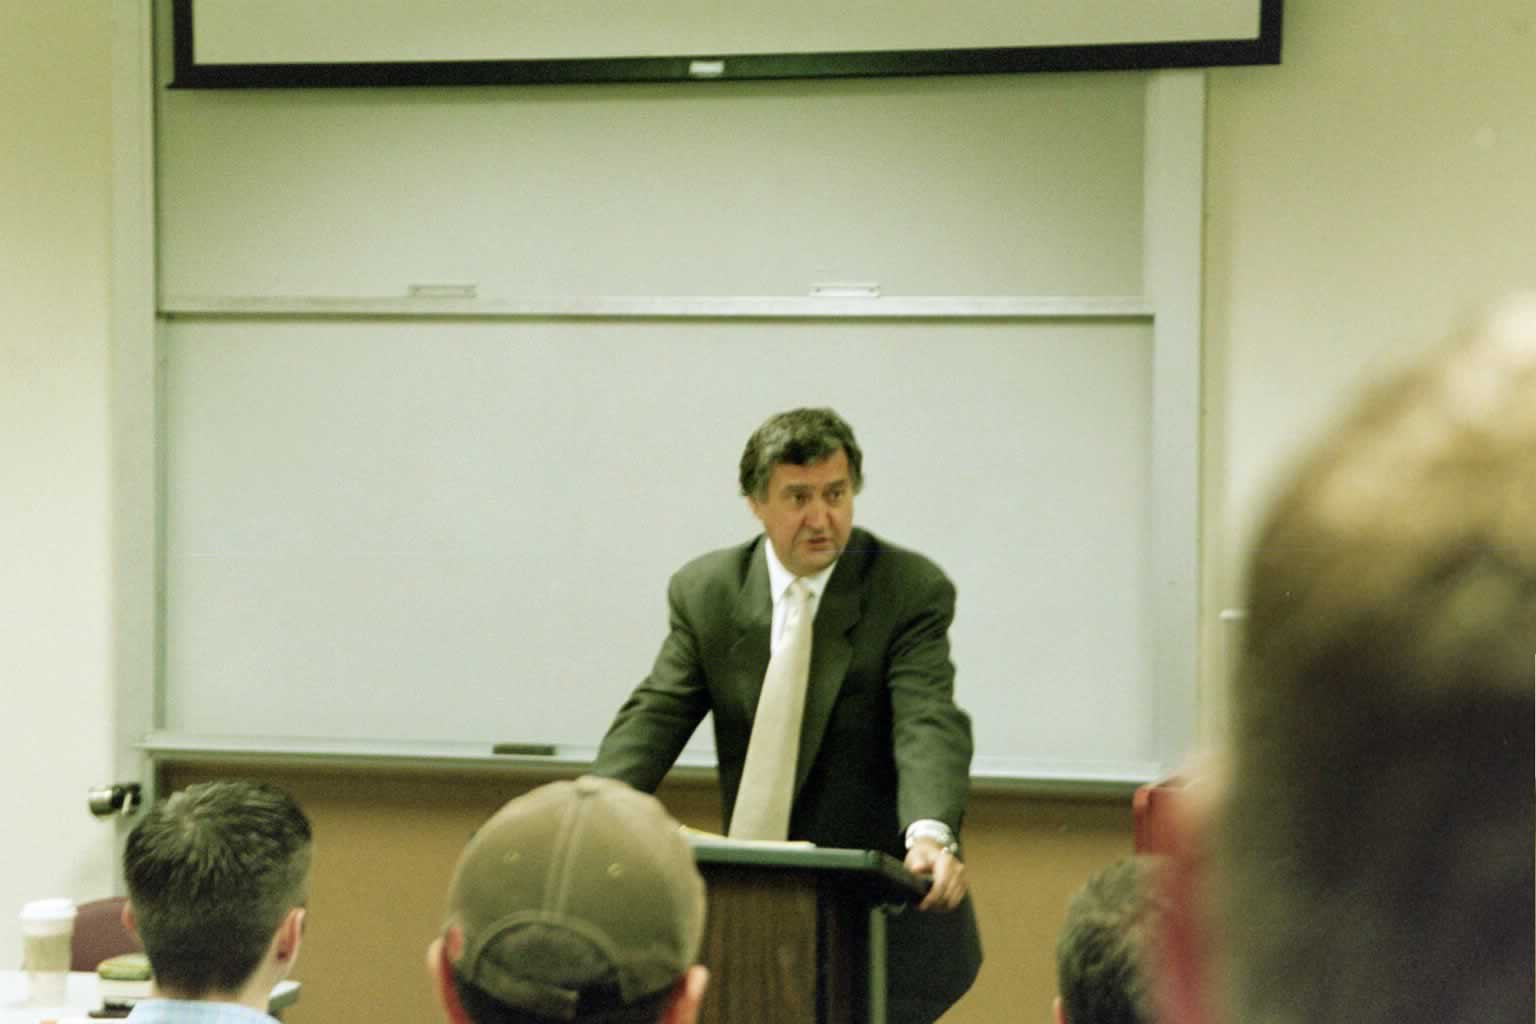 picture of Paul Marshall speaking in a classroom in front of a podium